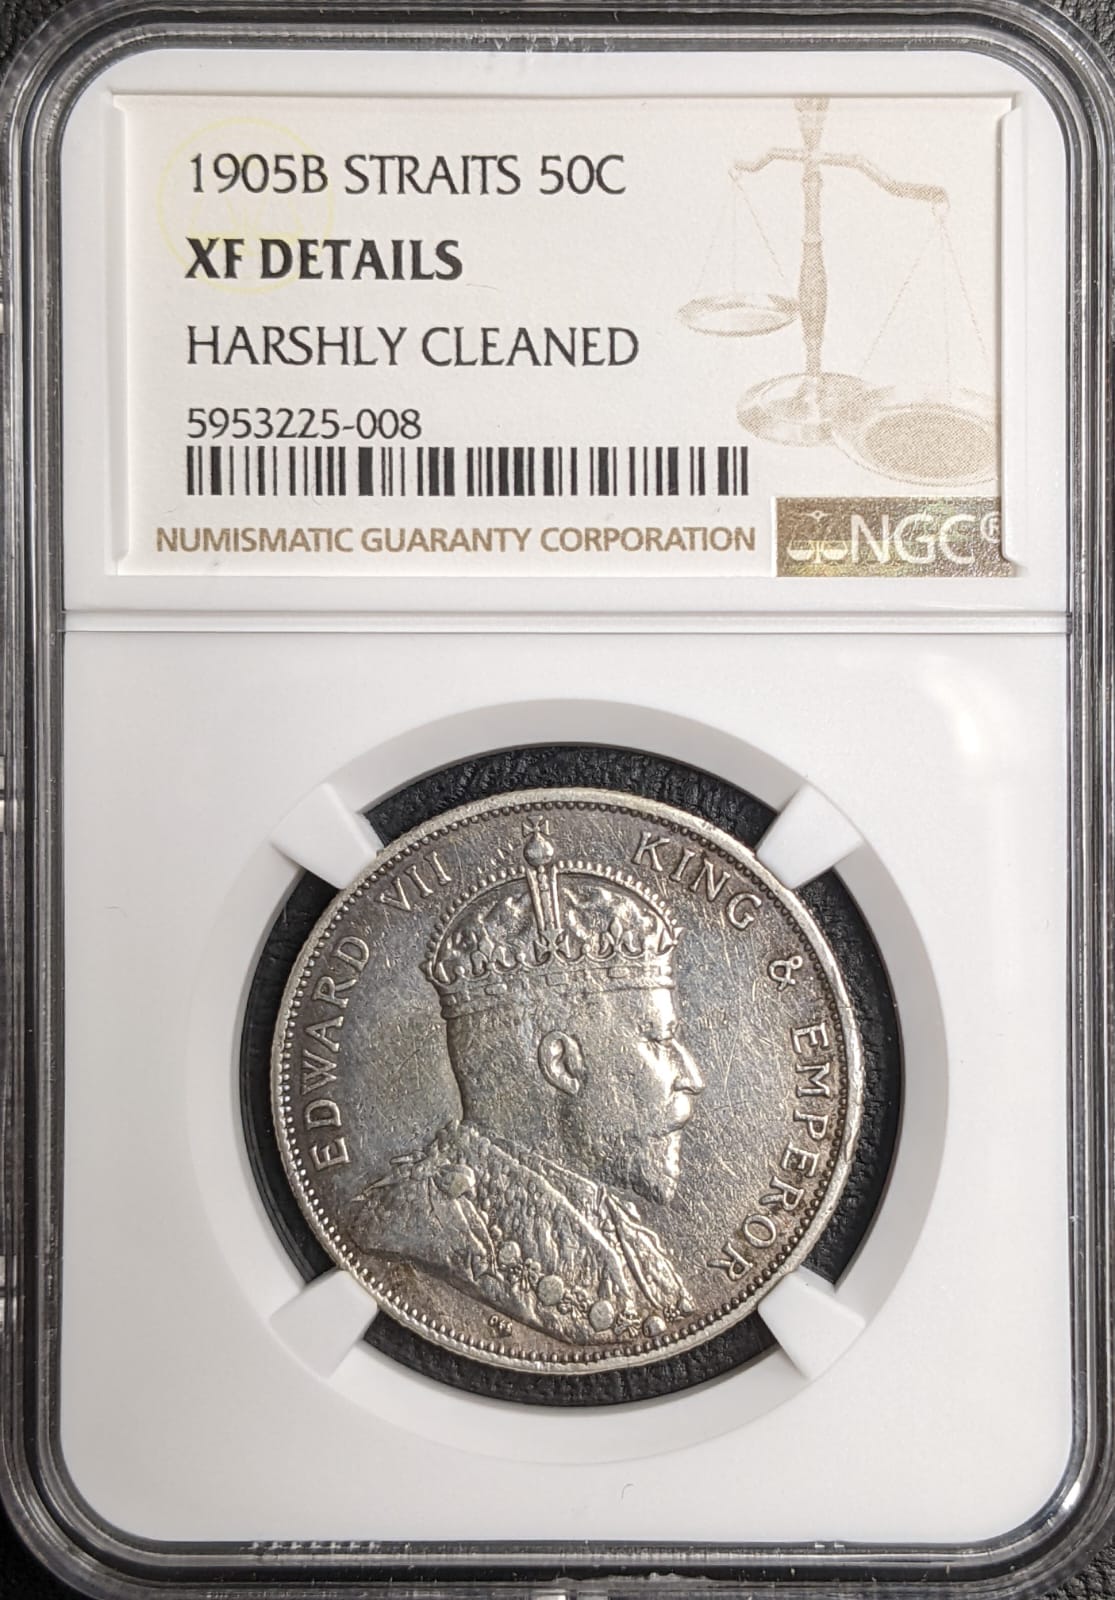 Straits Settlements 1905B 50 Cents KEVII NGC XF DETAILS, Harsely